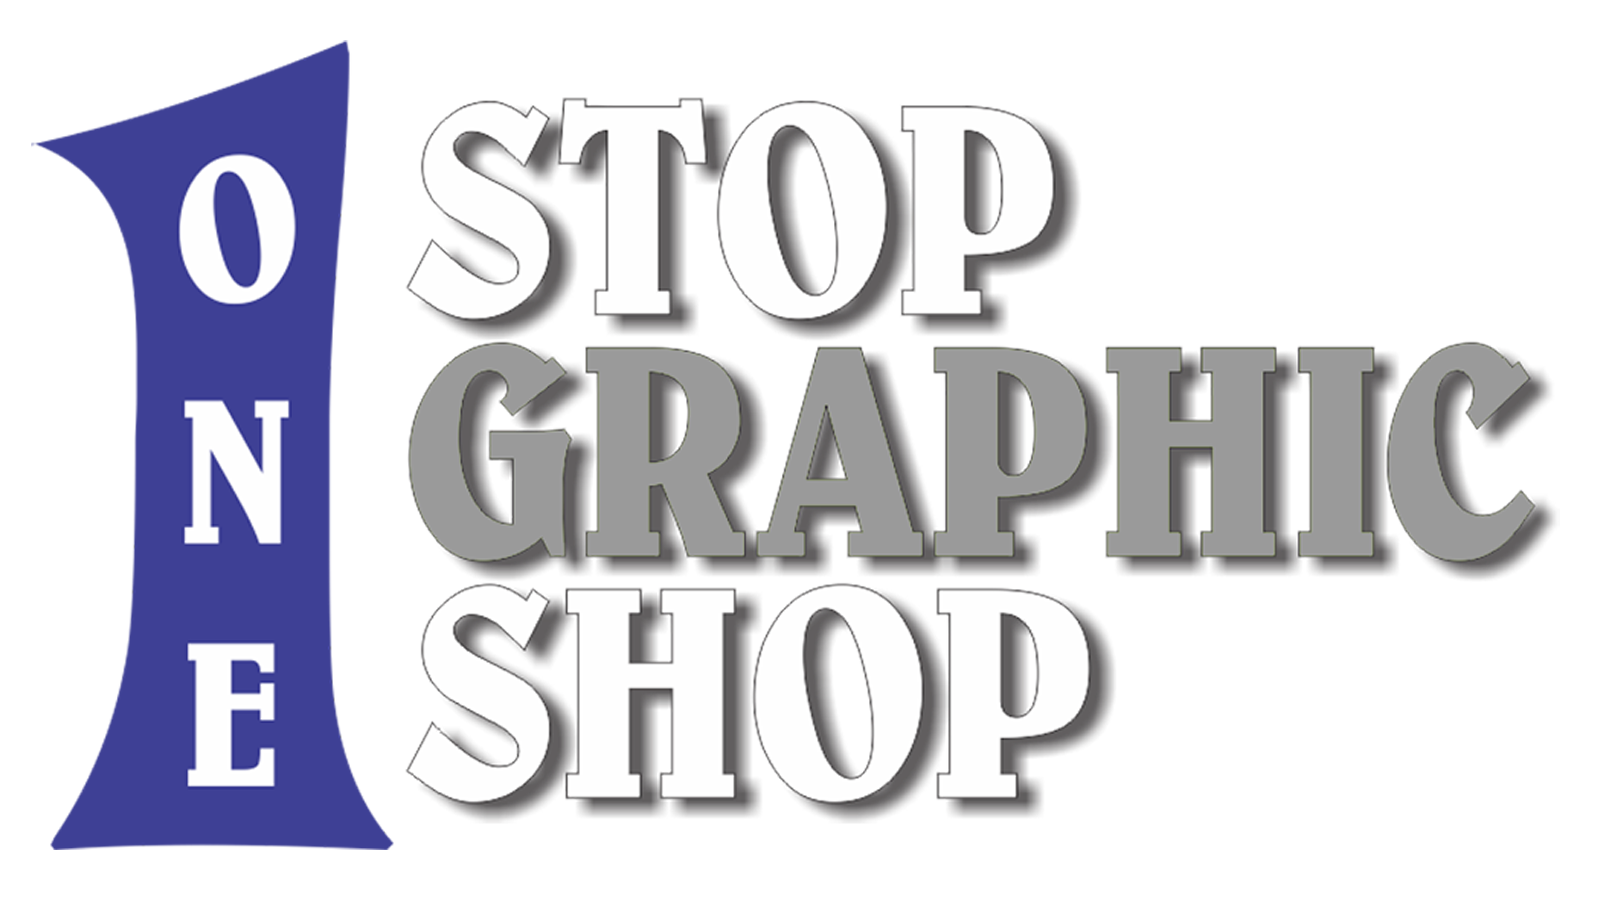 One Stop Graphic Shop